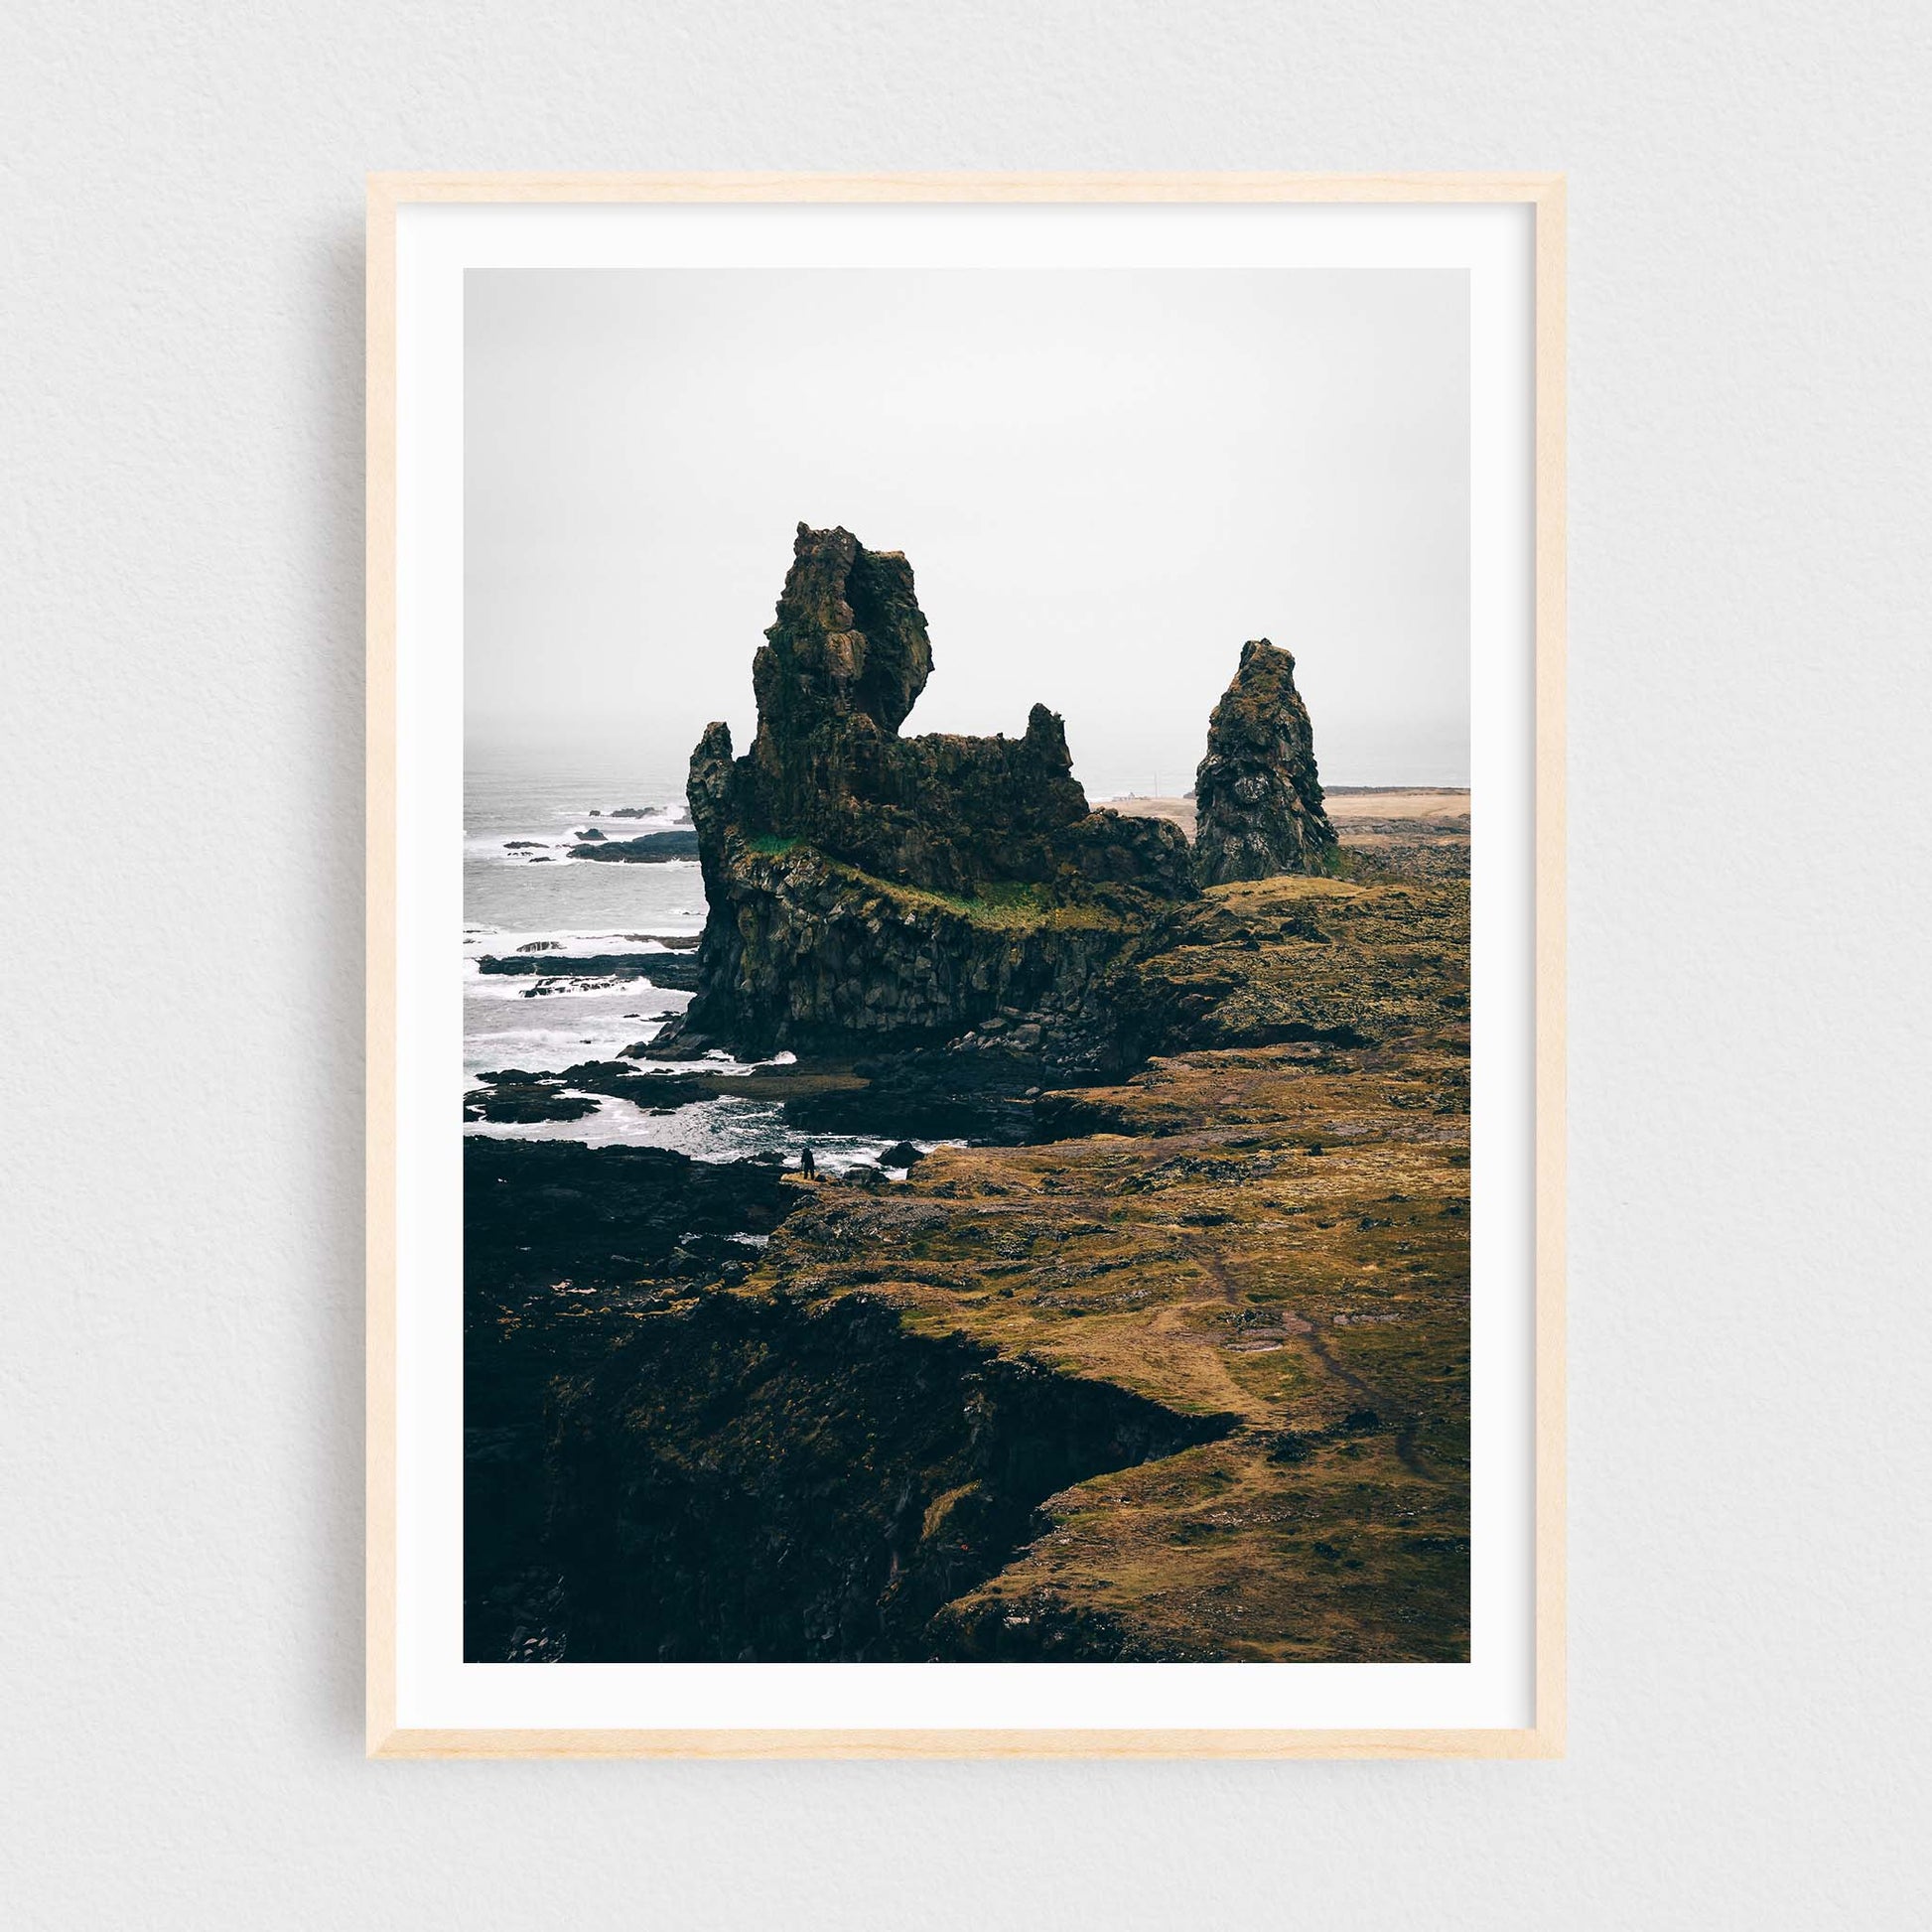 Iceland fine art photography print featuring Londrangar rock formations, in a maple frame